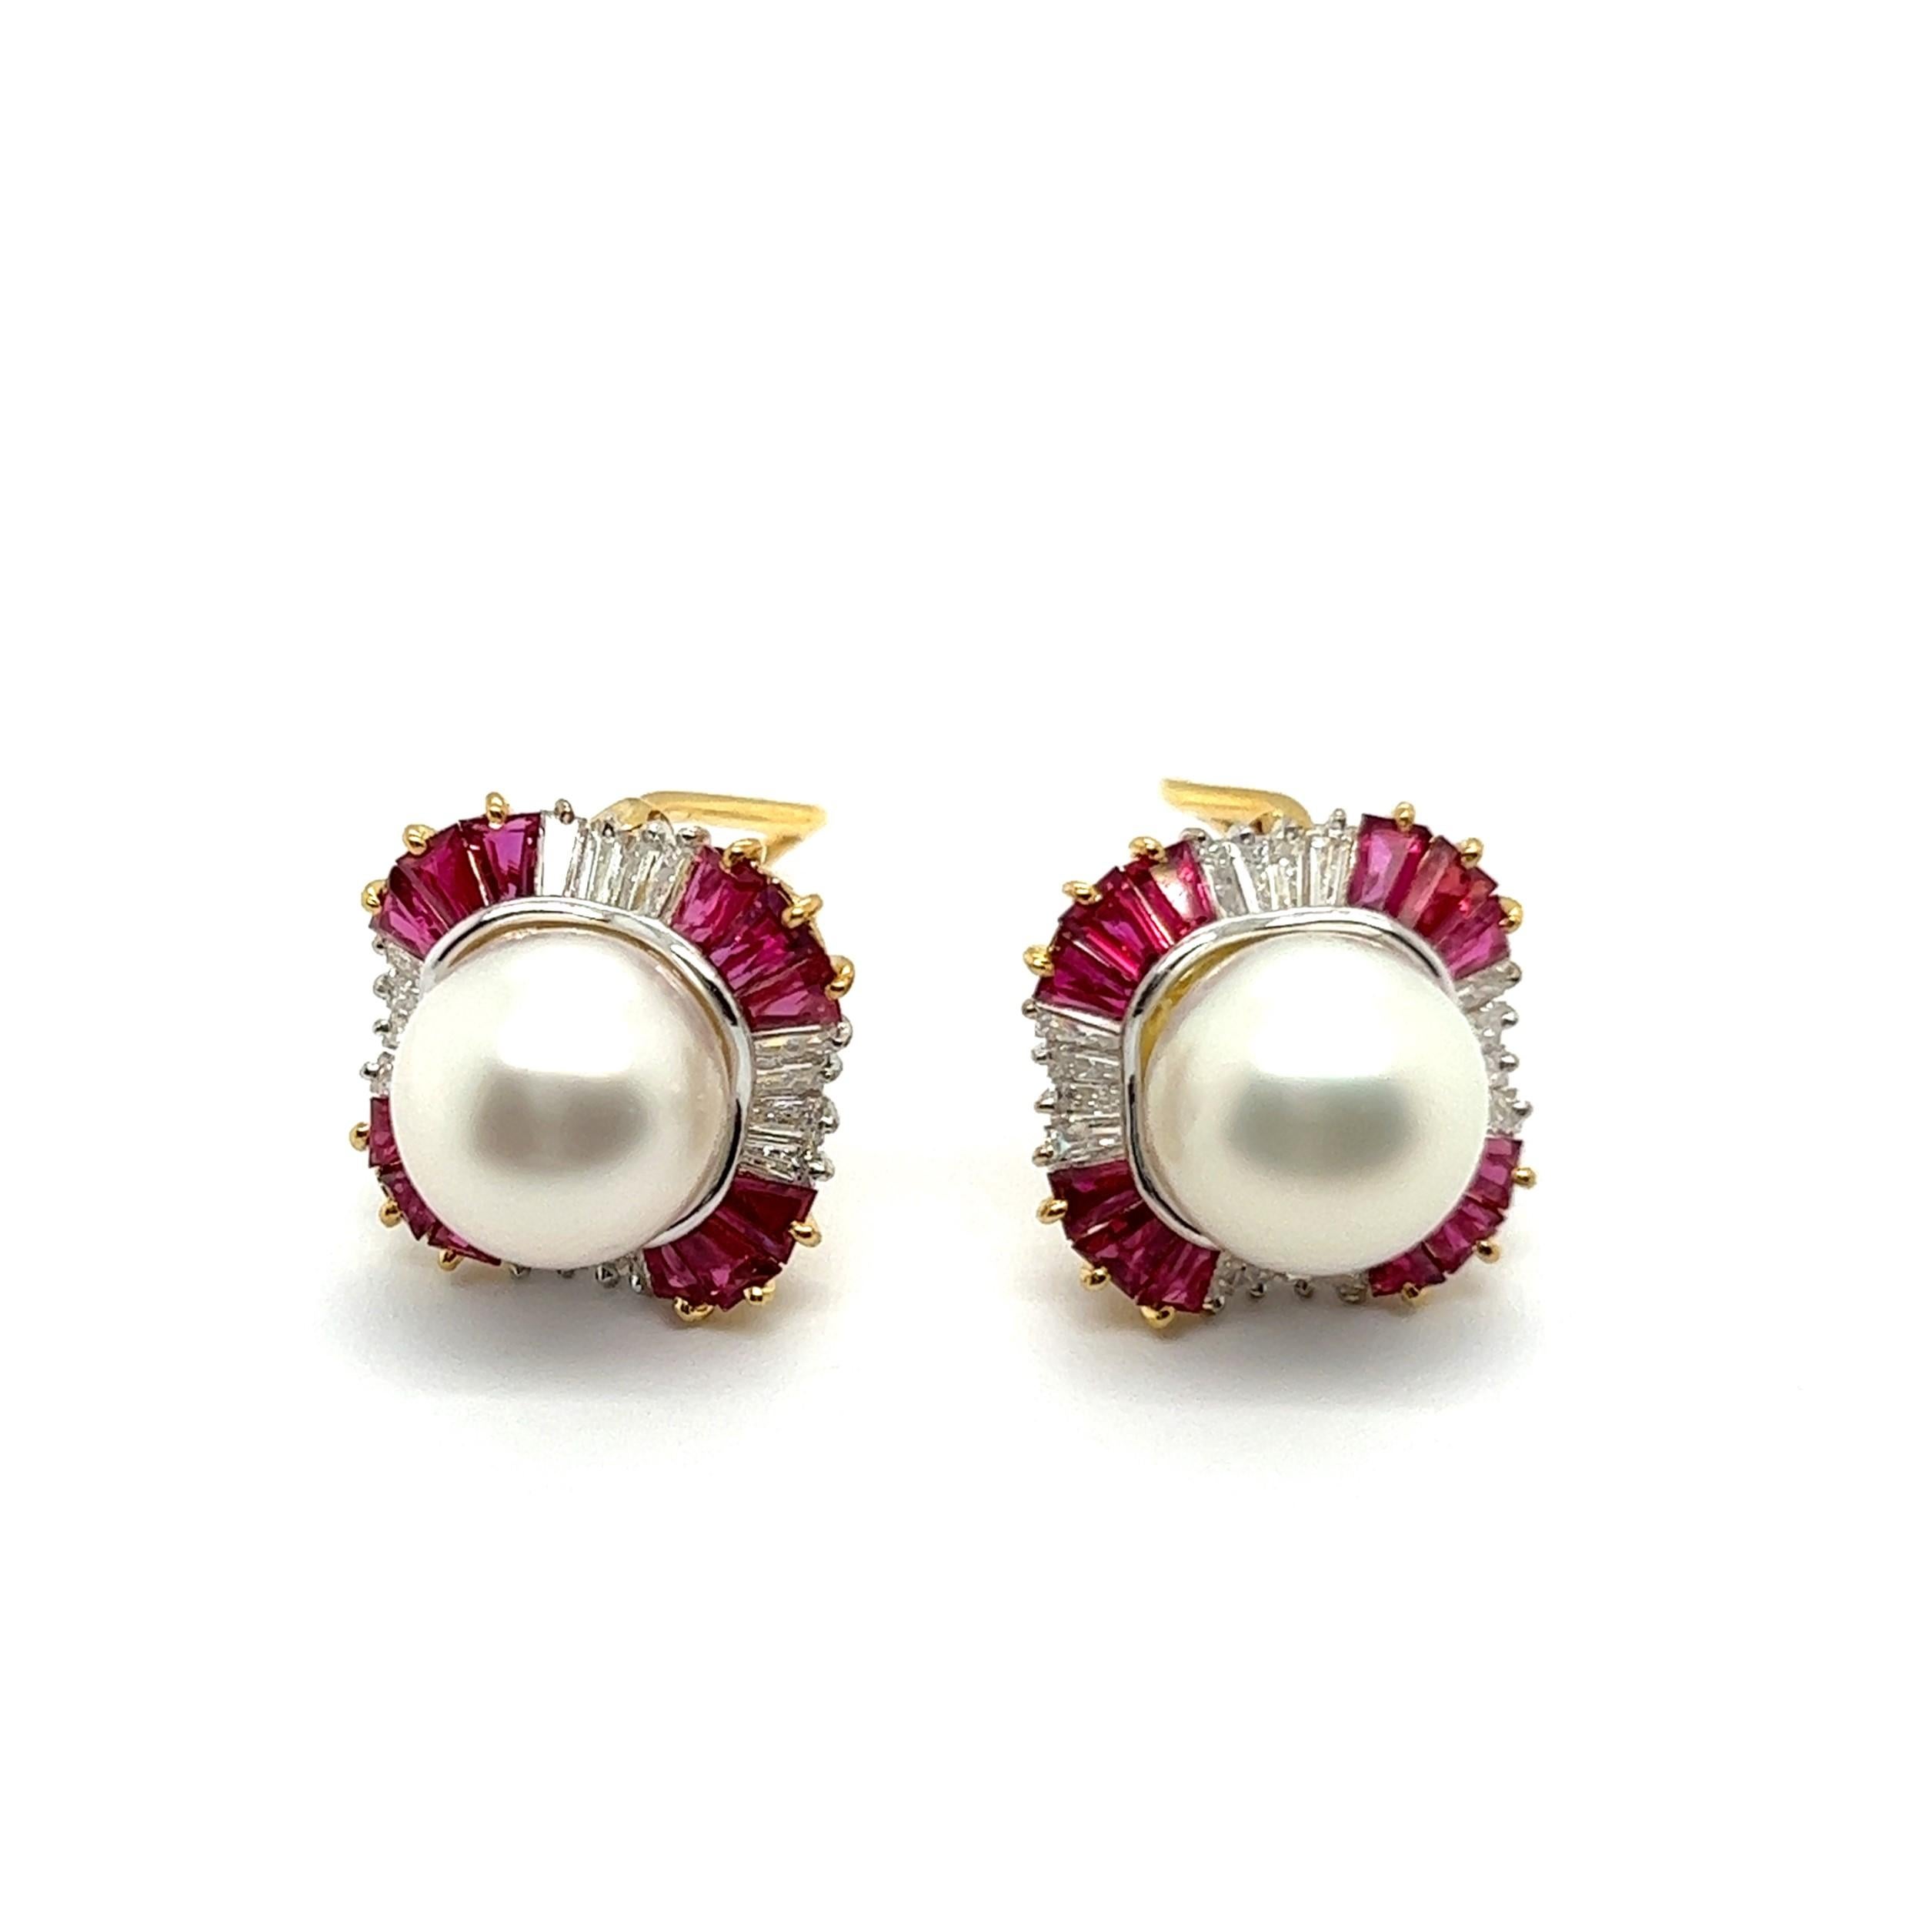 Introducing a pair of clip-on earrings in 18-karat yellow and white gold, highlighting exquisite pearls and elegant gemstones.

At the heart of each earring, one captivating South Sea cultural pearl illuminates a stunning silver hue. Surrounding